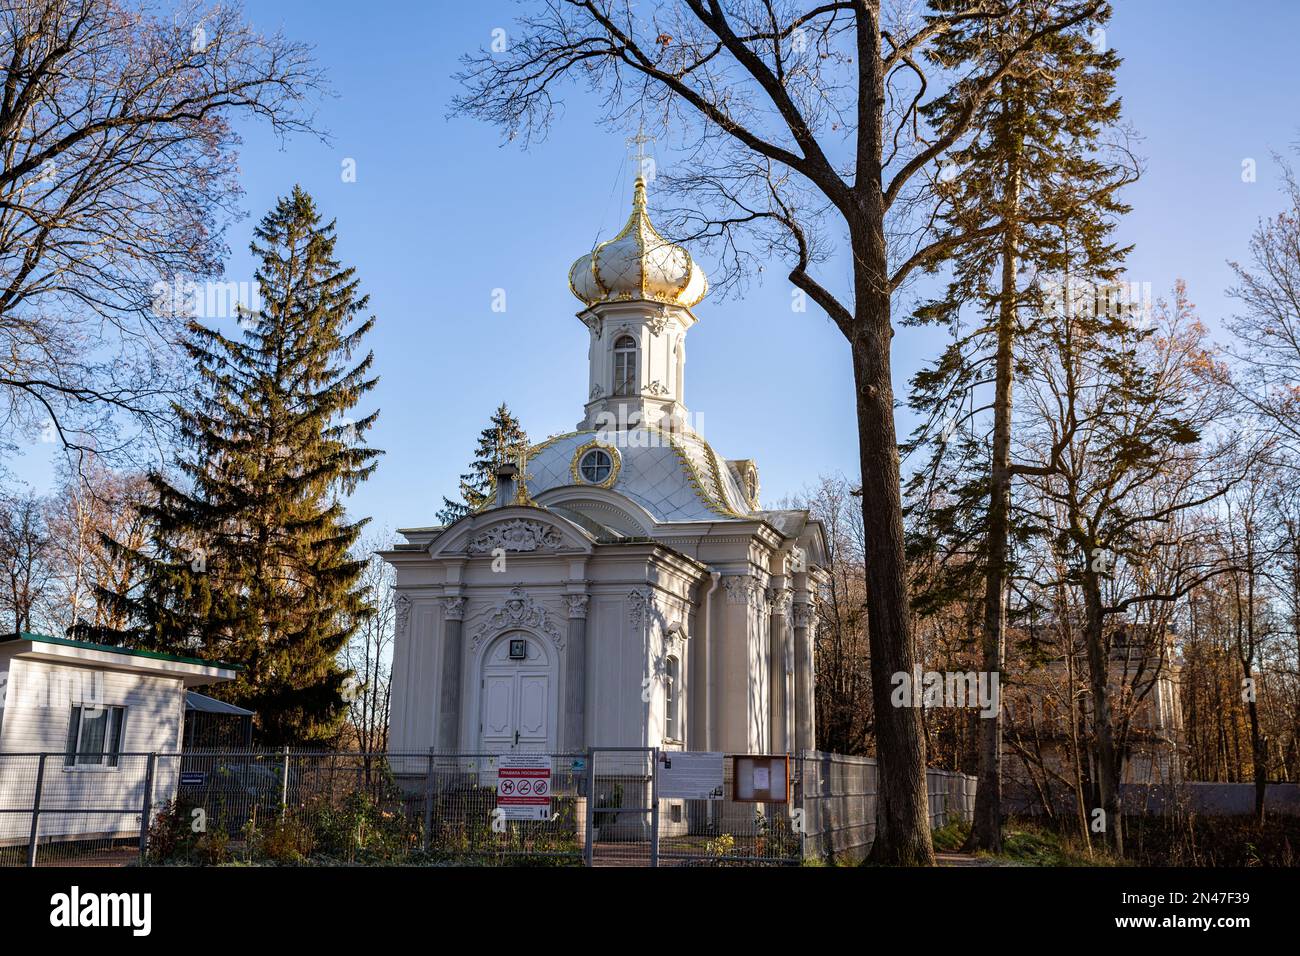 Church of the Holy Trinity at His Imperial Majesty's Own dacha. Old Peterhof, St. Petersburg, Russia Stock Photo